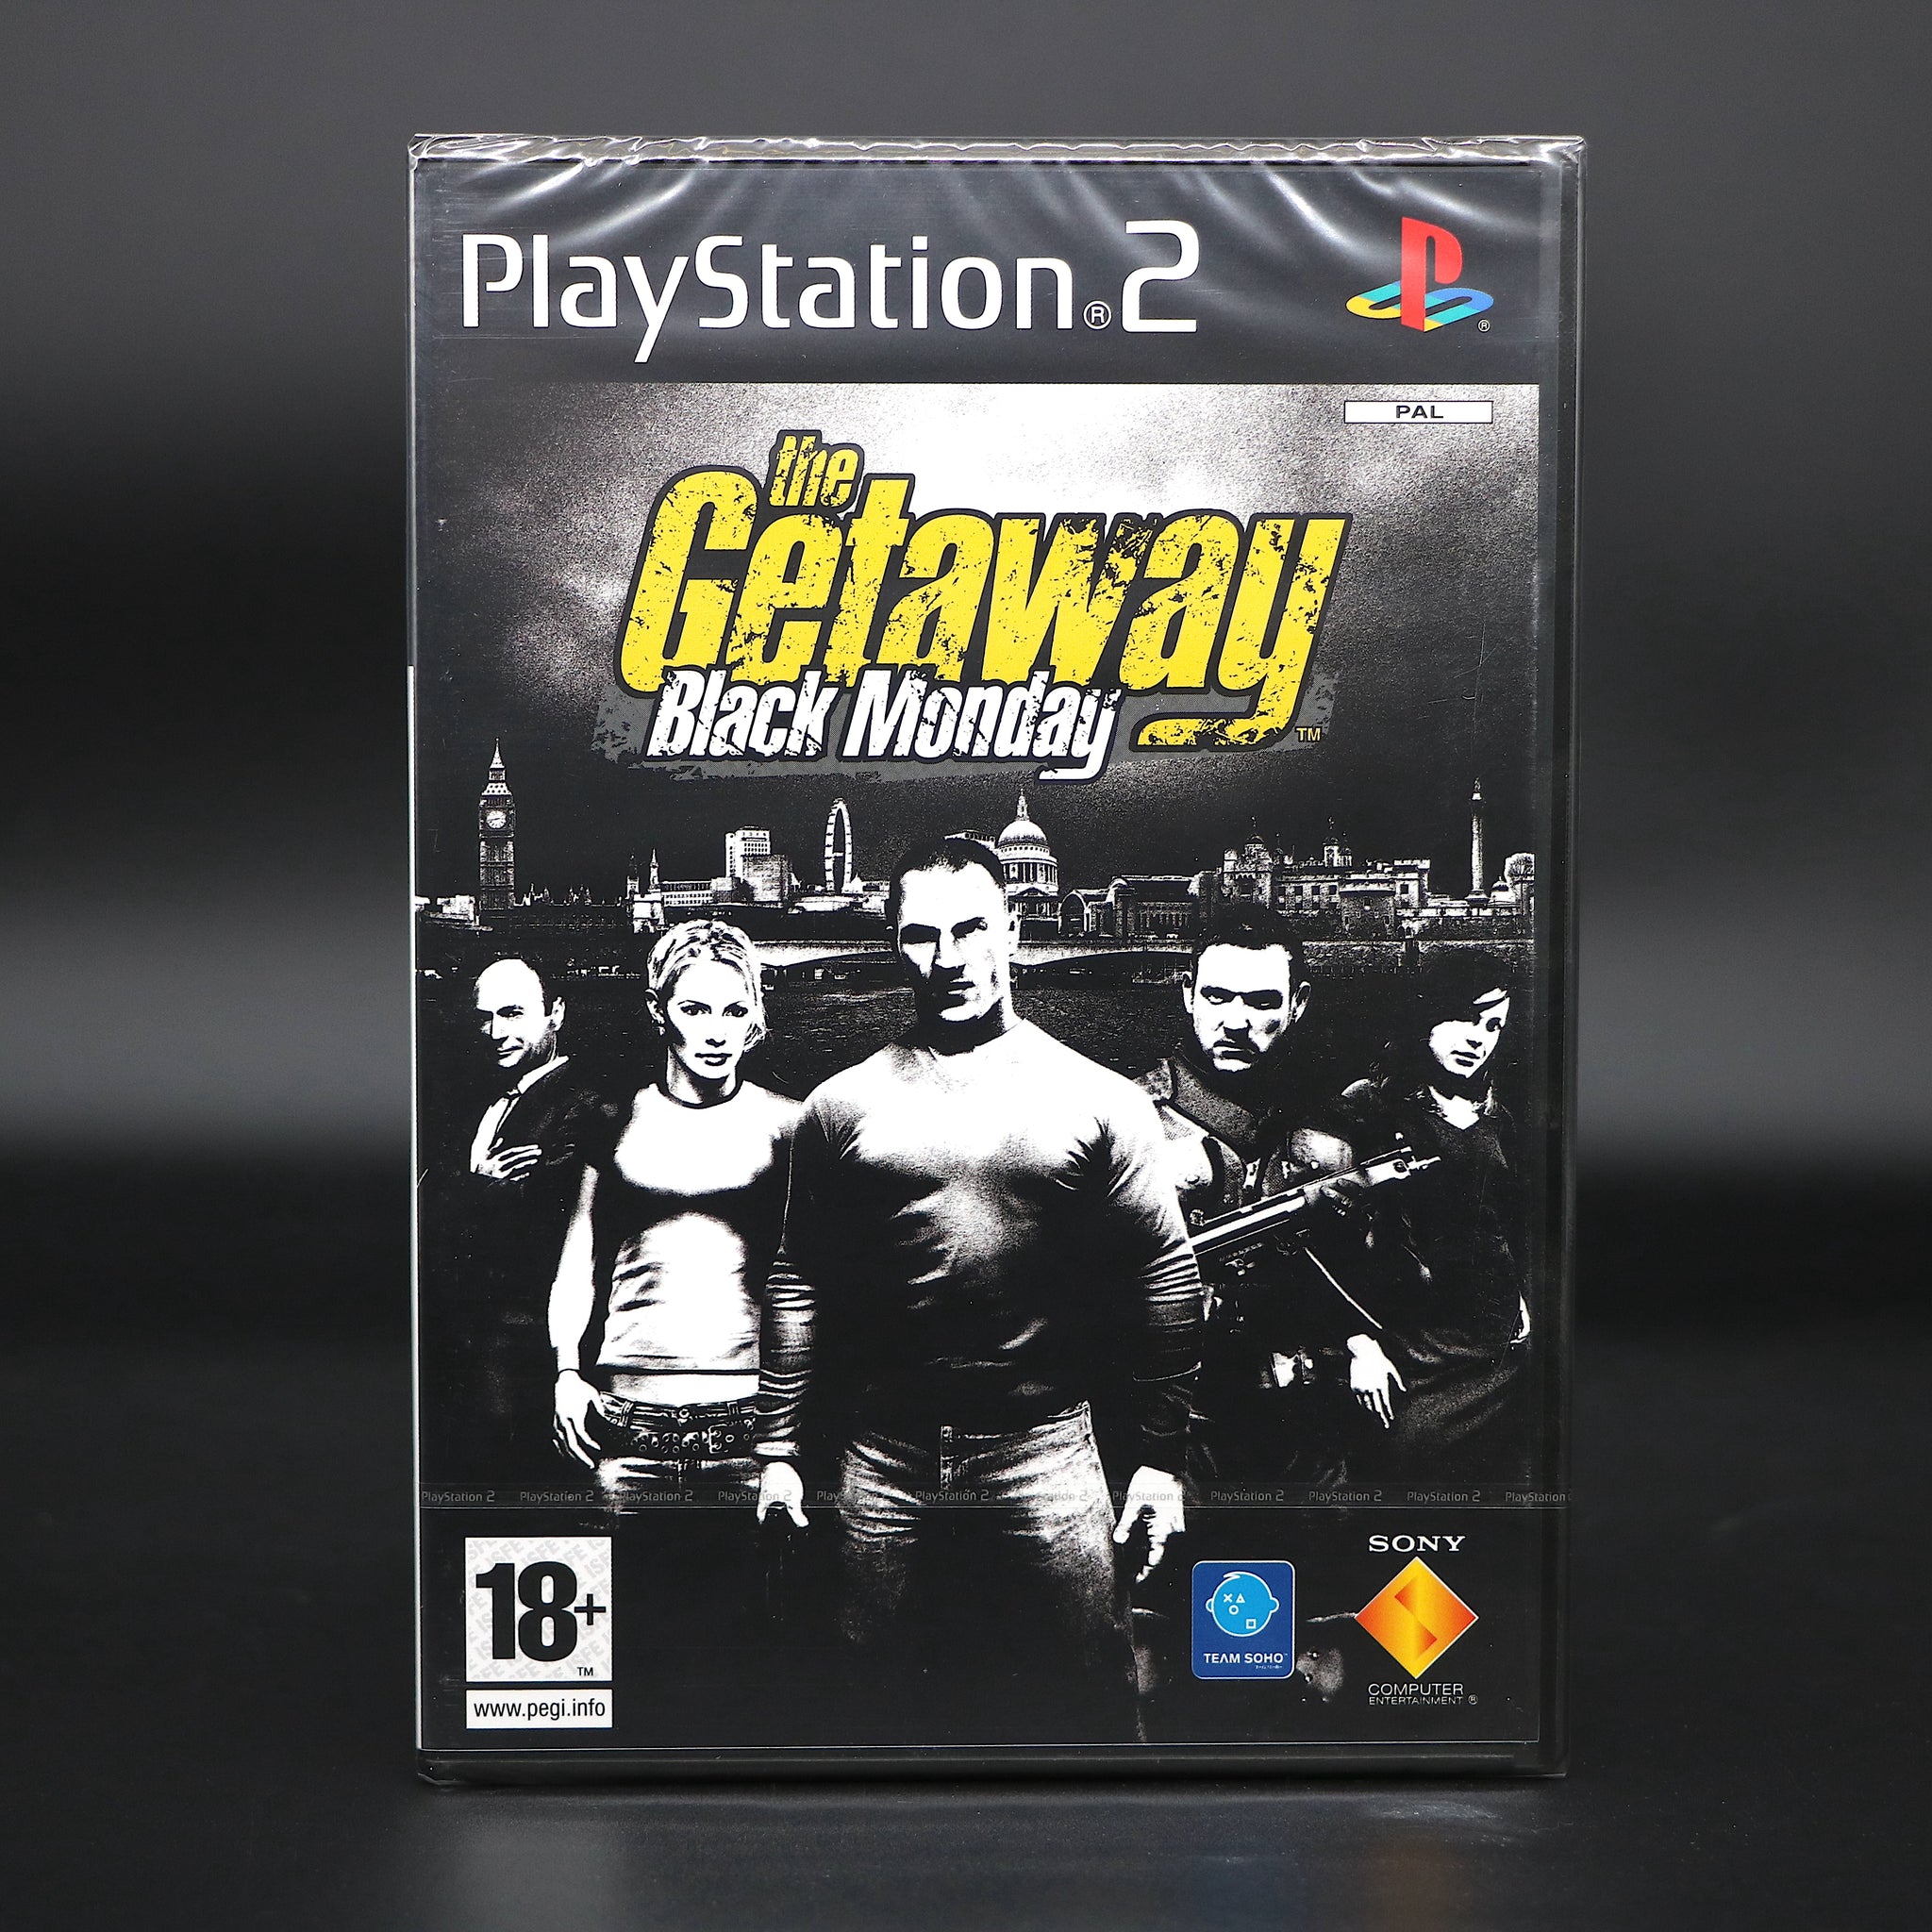 Getaway Black Monday (The) | Sony Playstation 2 PS2 Game | New & Sealed